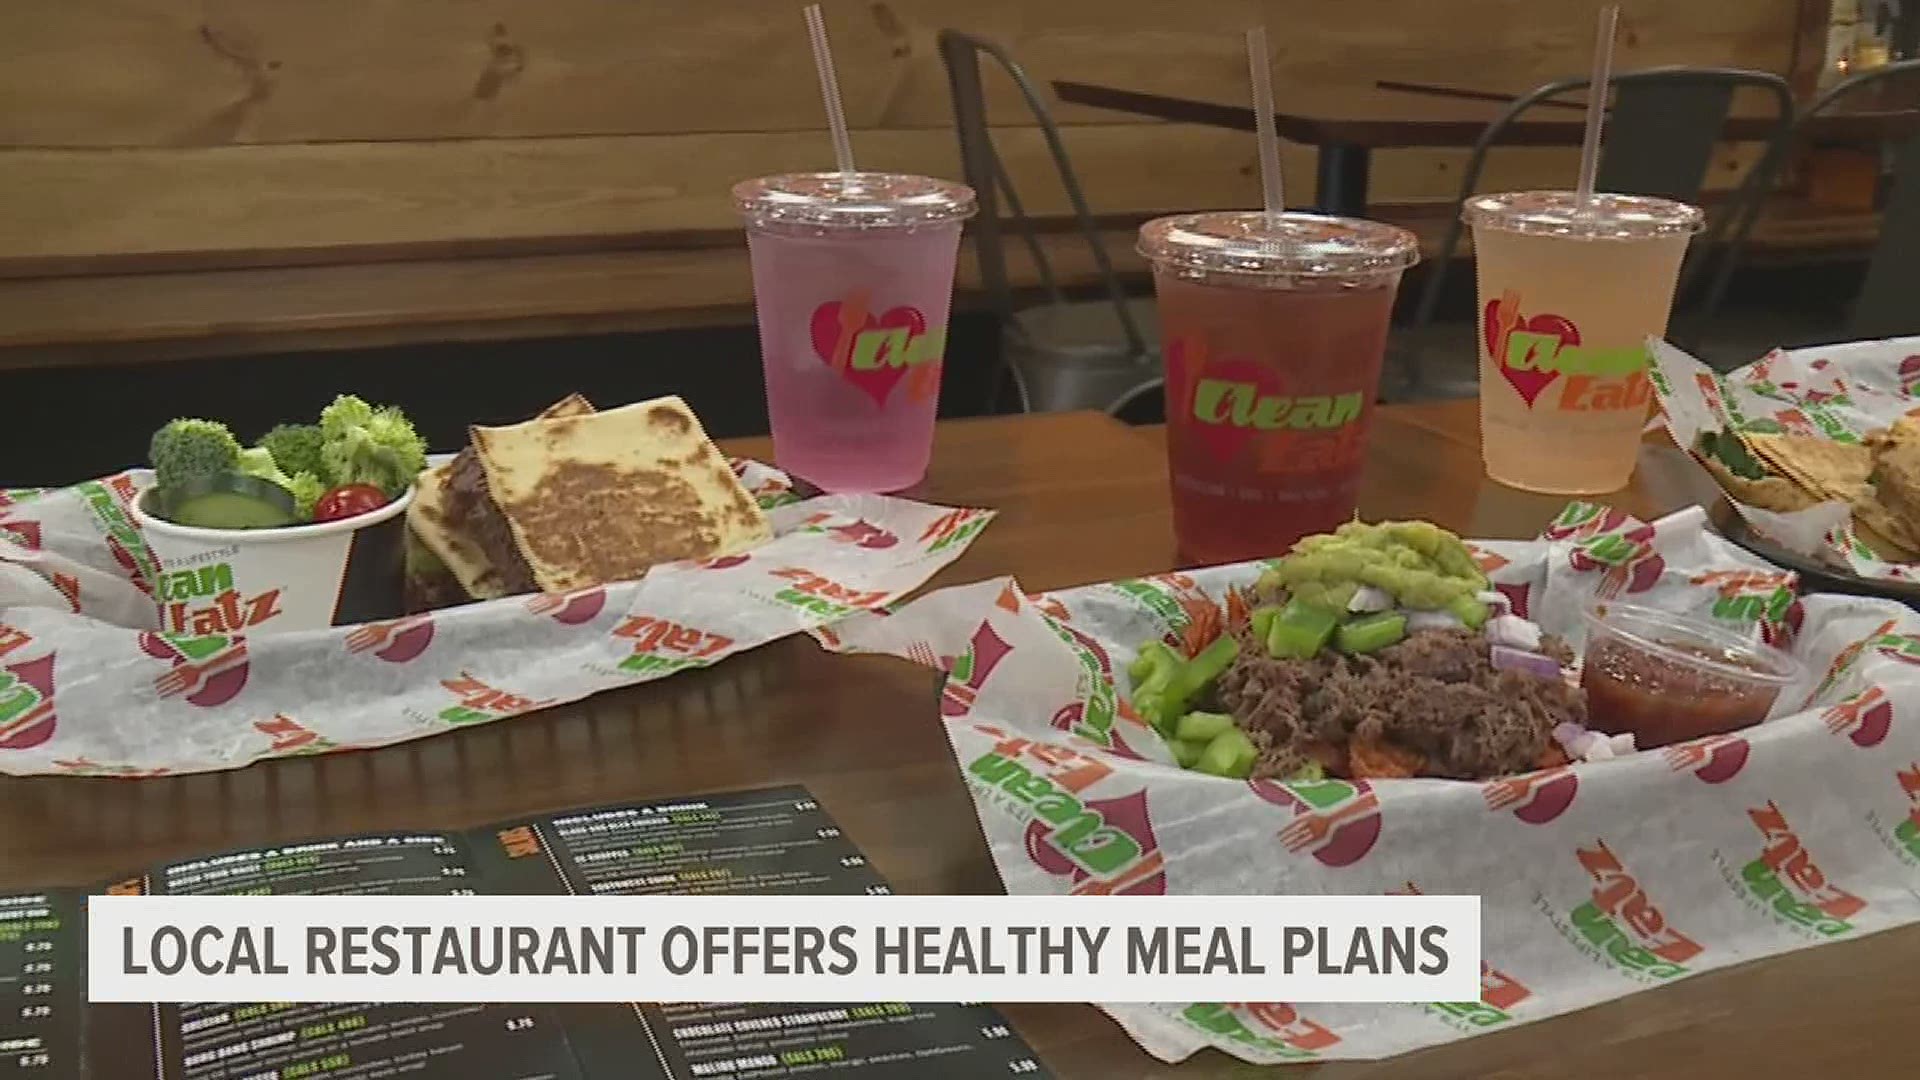 A local restaurant in Lancaster County, offering healthy meal plan options to locals.